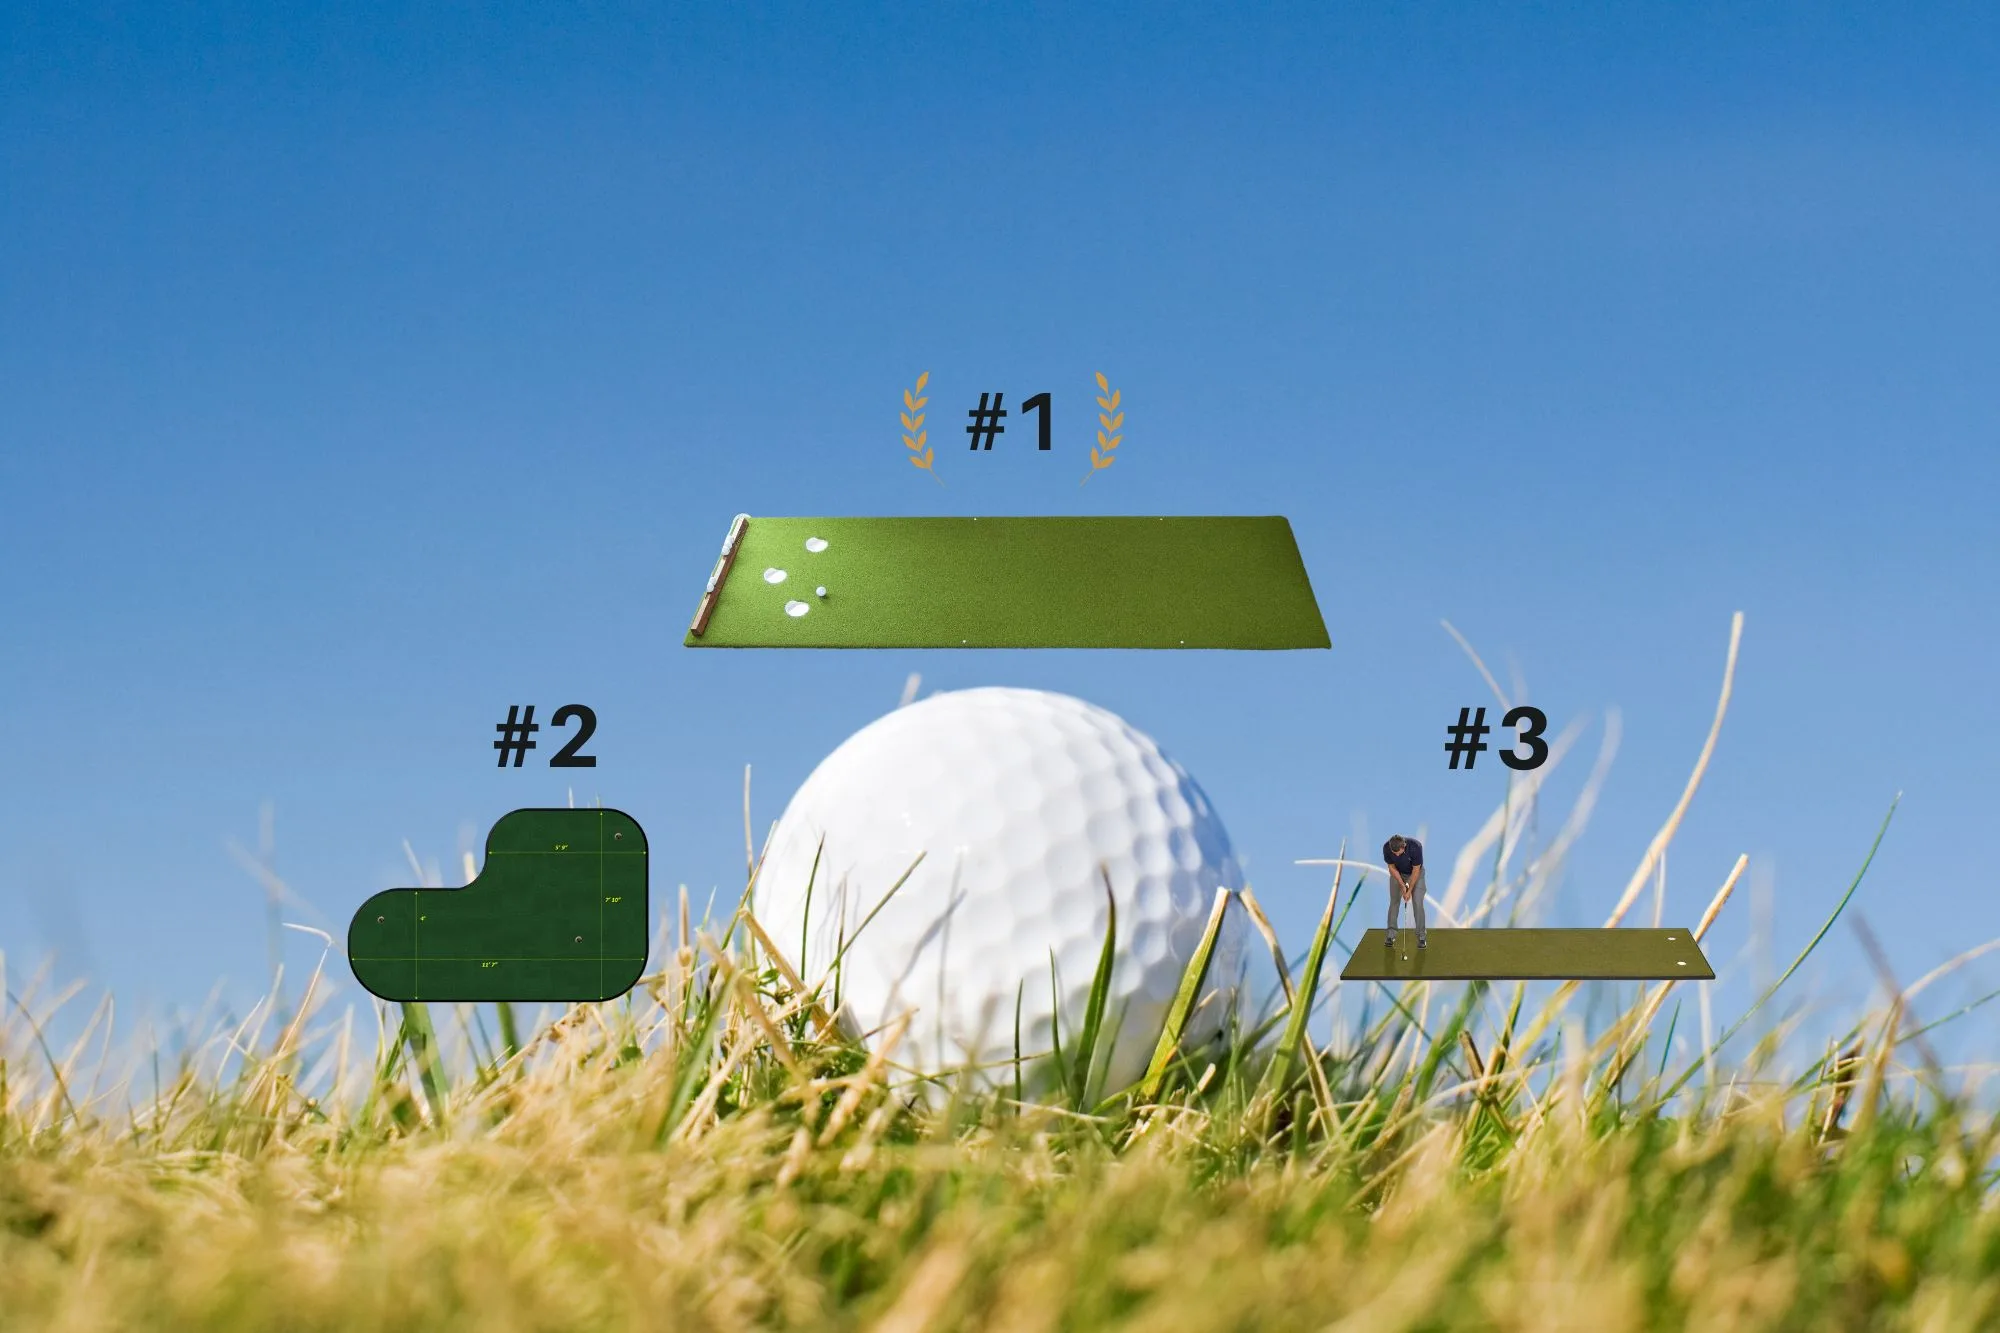 The 10 Best Putting Greens to Improve Your Golf Game